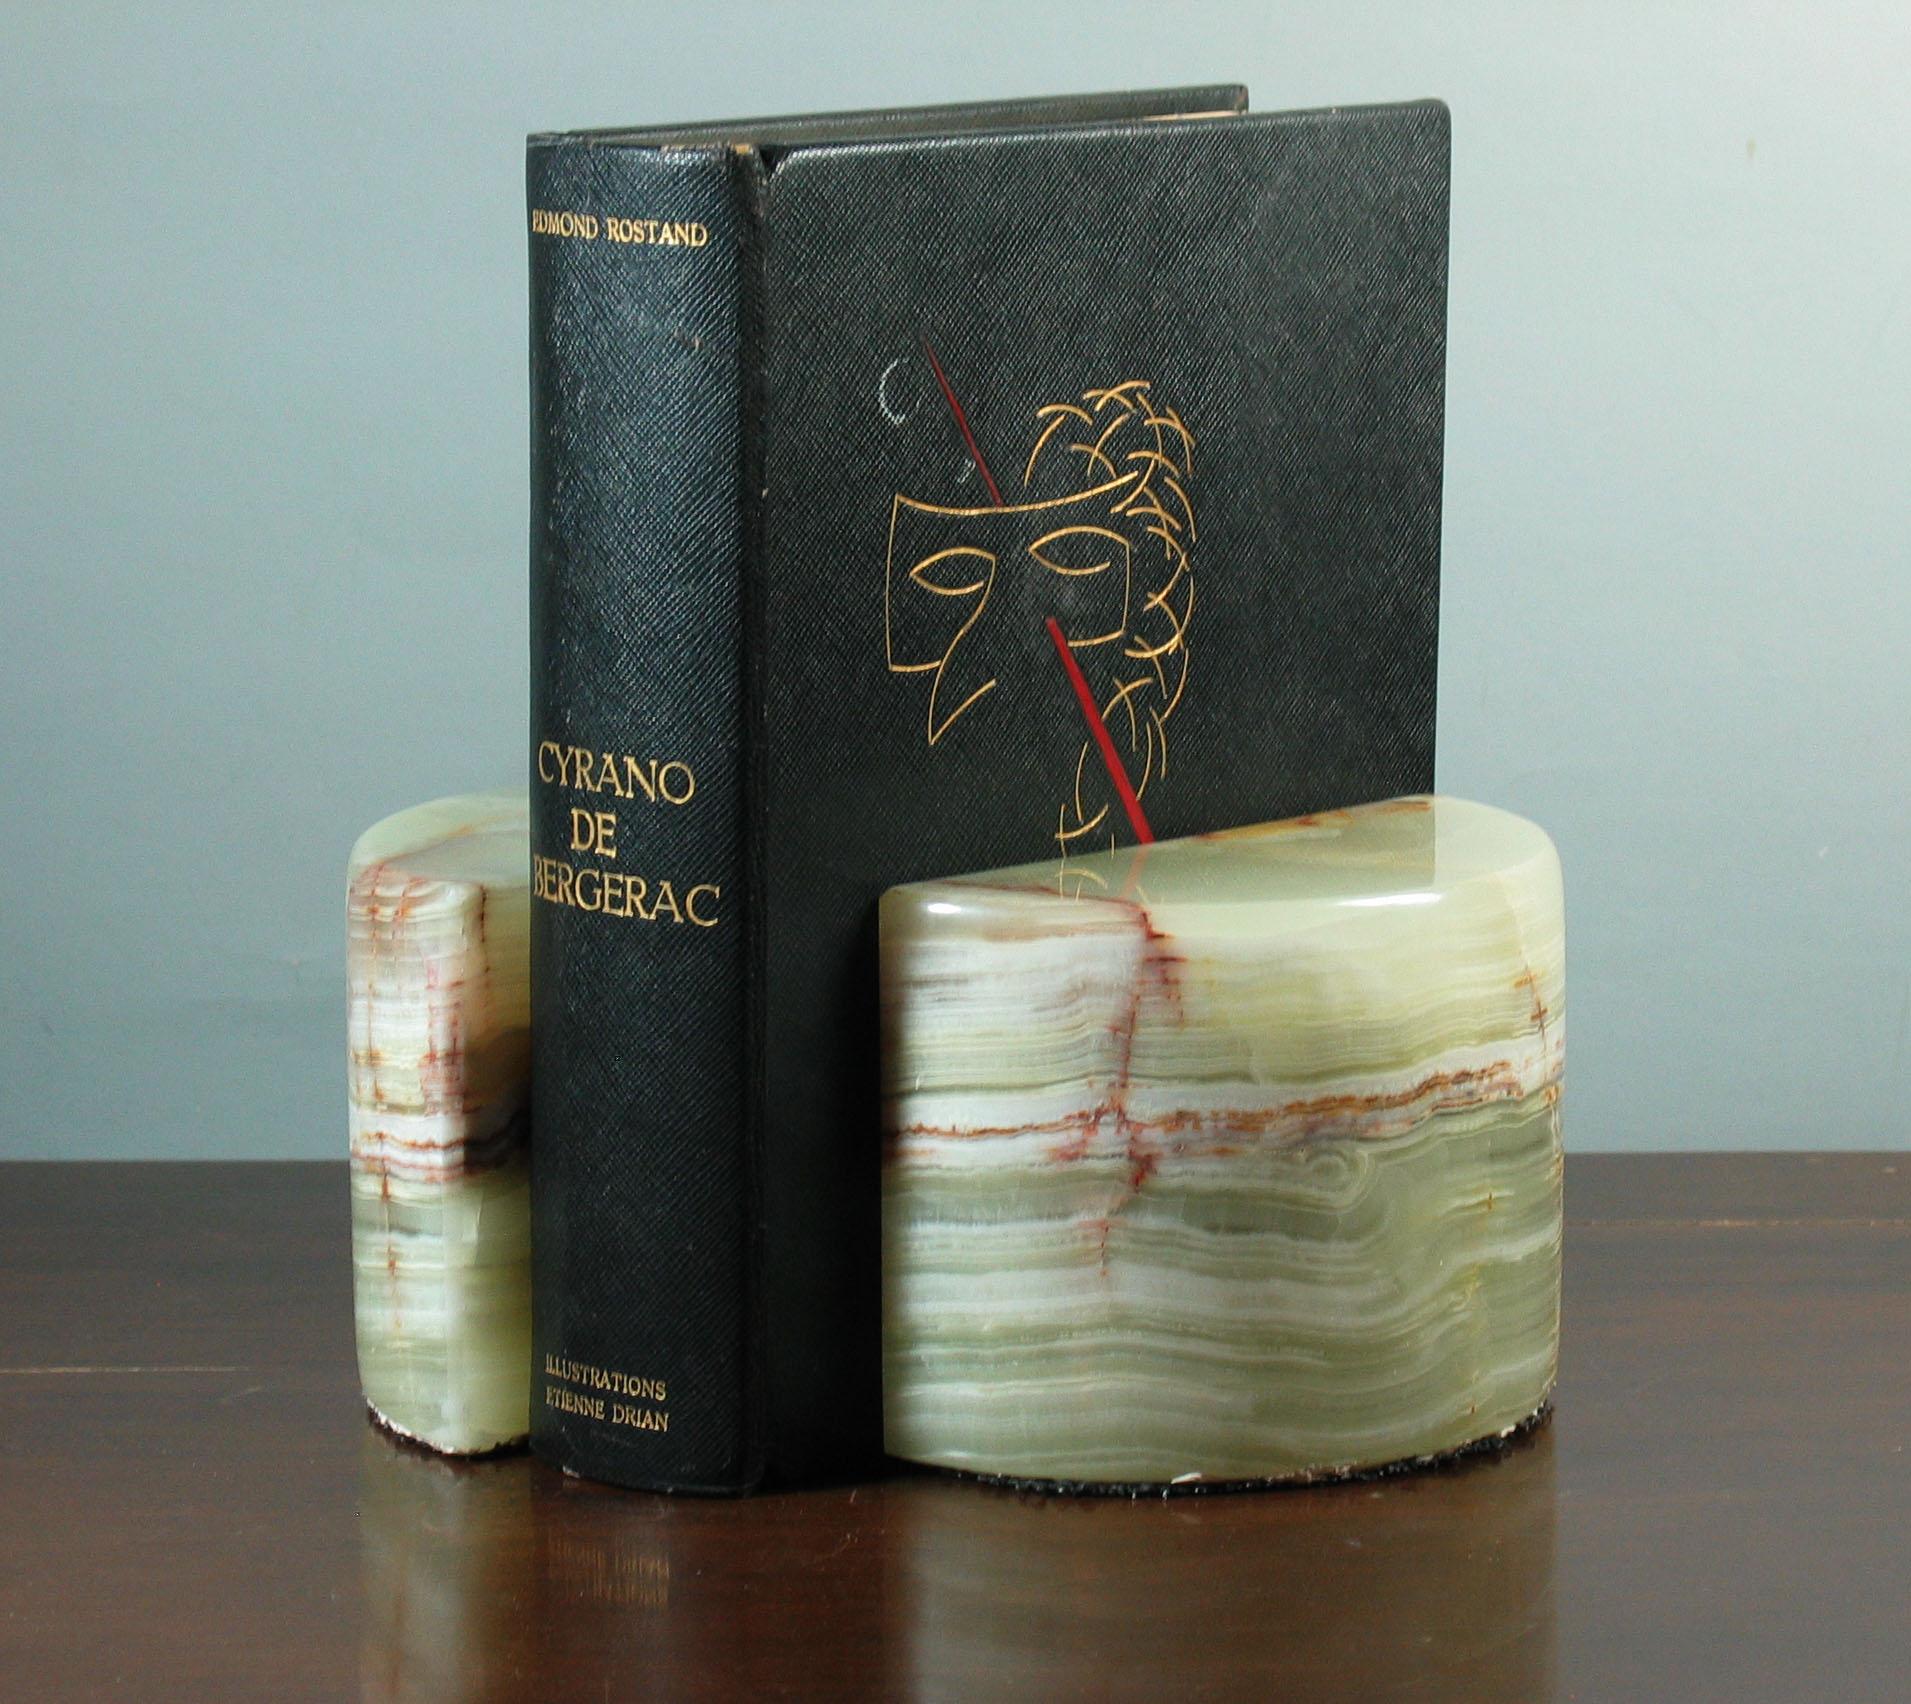 ART DECO STYLE DEMI-LUNE POLISHED
BANDED CALCITE BOOKENDS
Circa 1970

Pattern composed of natural celadon green and cream tones,
complete with distinct rust stiration bands.

Large and heavy
4